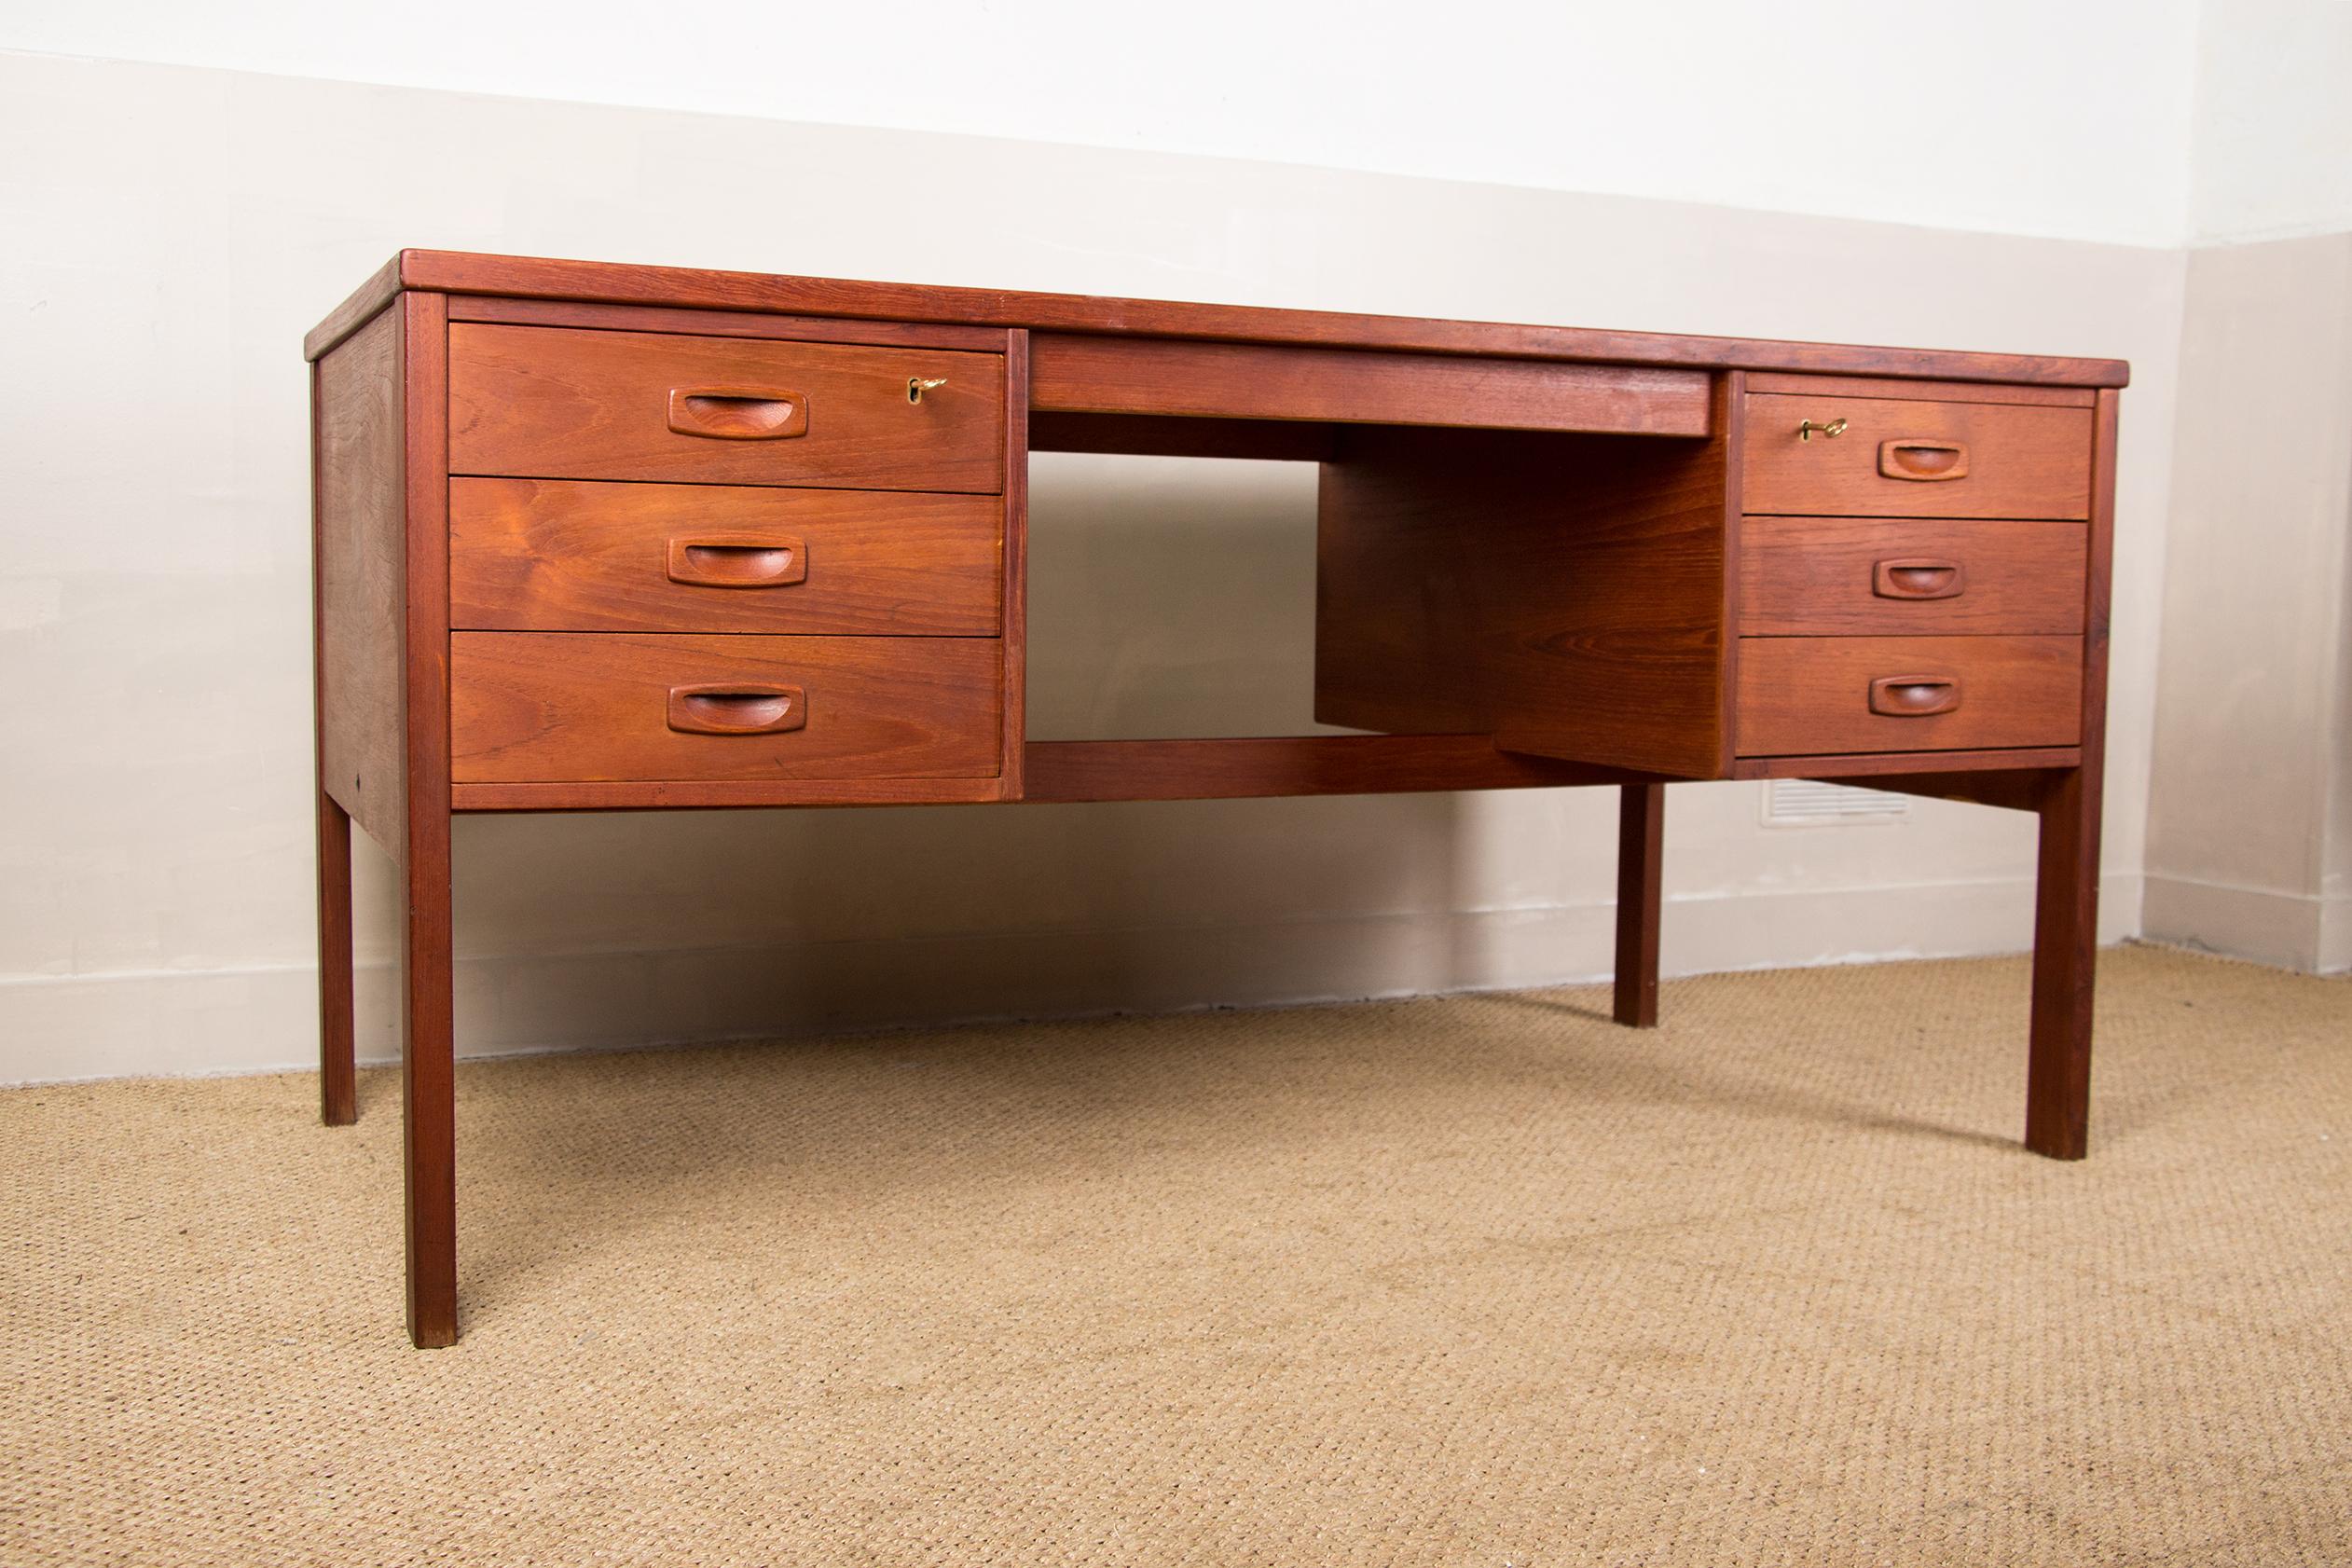 Mid-20th Century Danish Teak Double Sided Desk with 6 Drawers, 1960s, Modernist Design